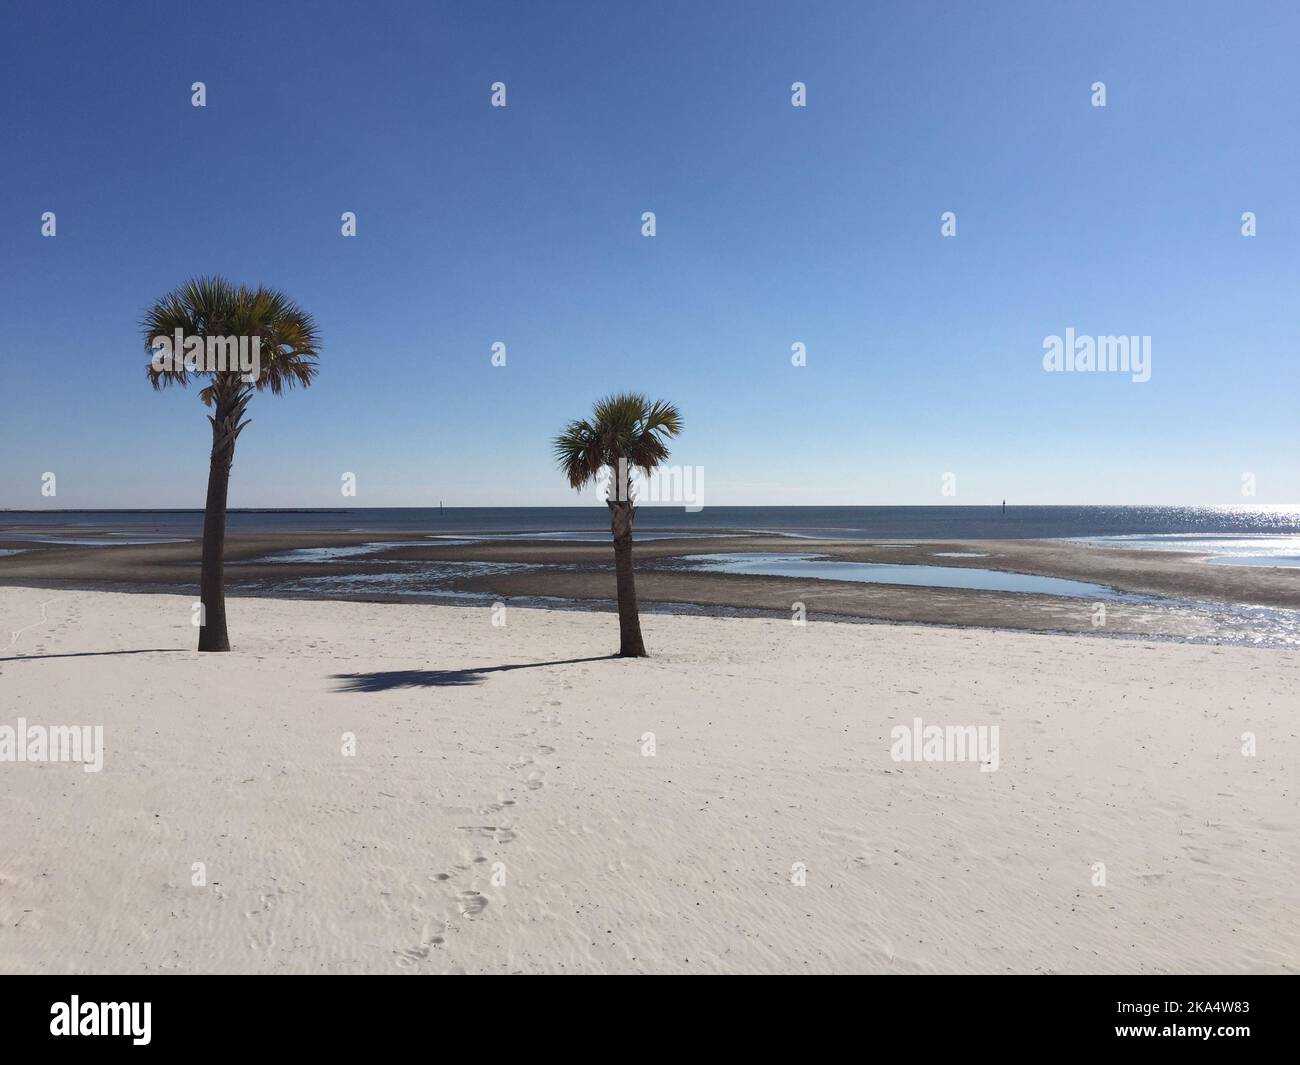 Two palm trees and shadows on an empty beach, Biloxi, Mississippi, USA Stock Photo